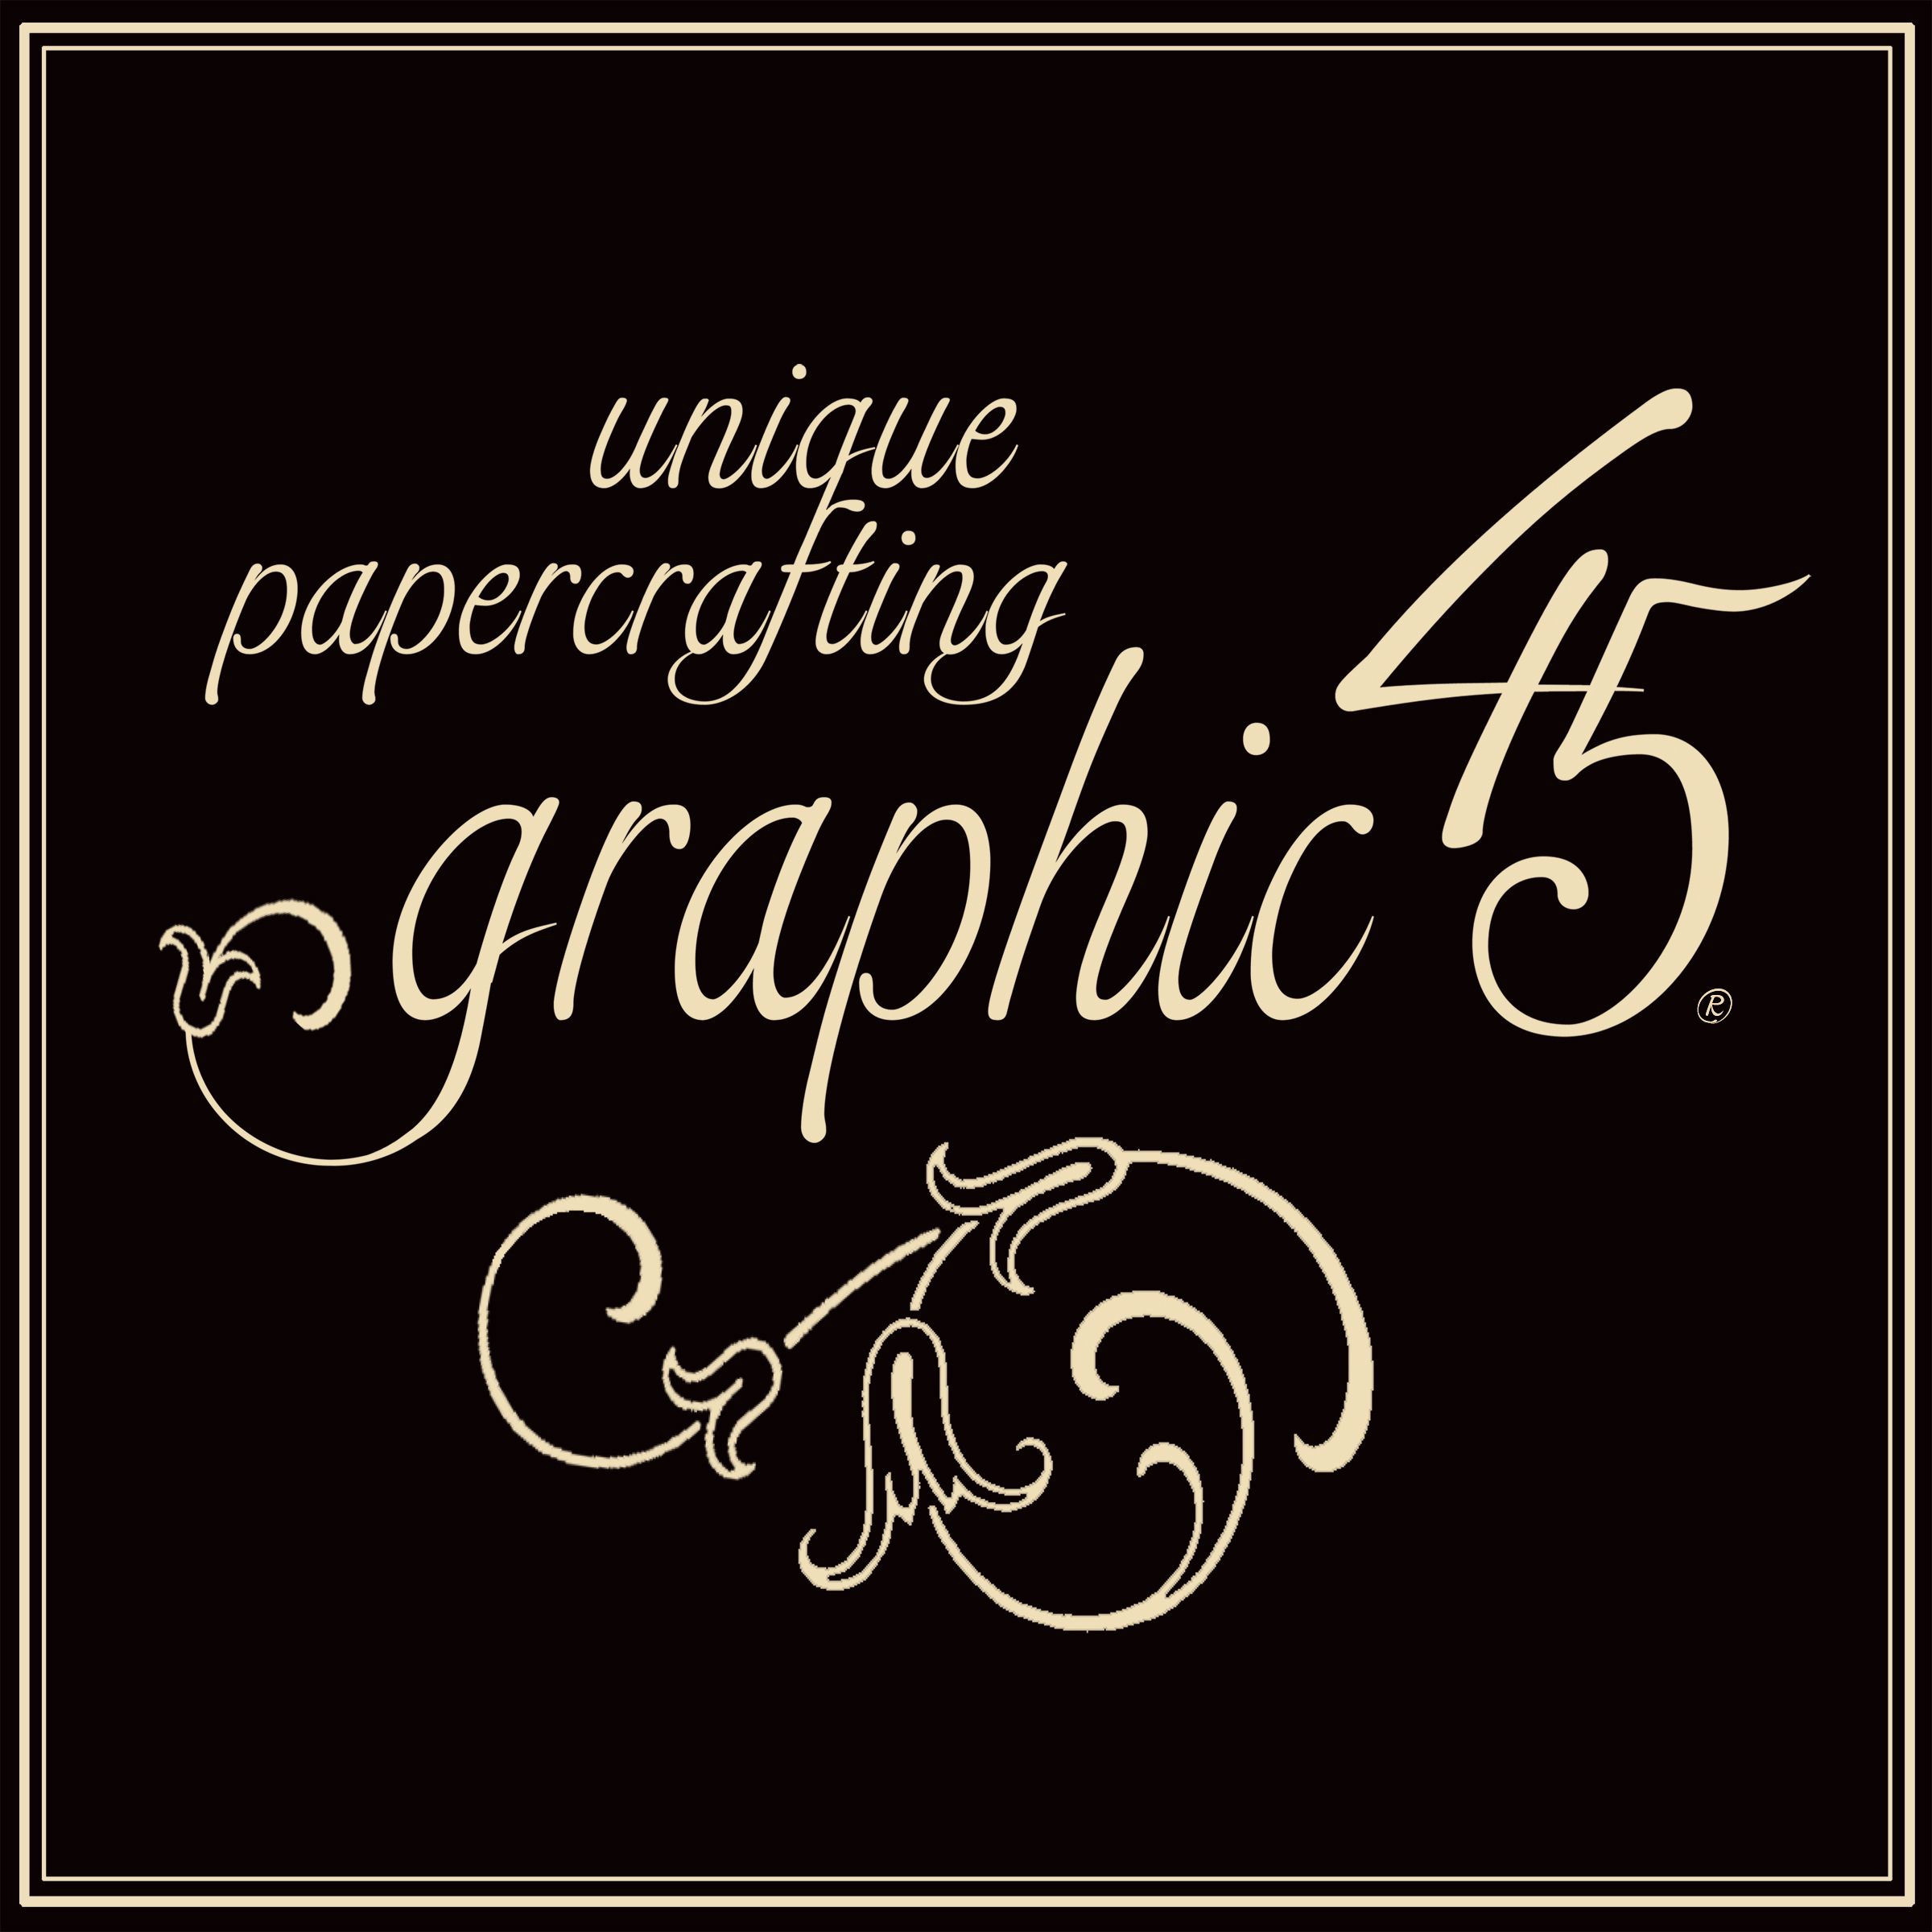 Graphic 45 Papers